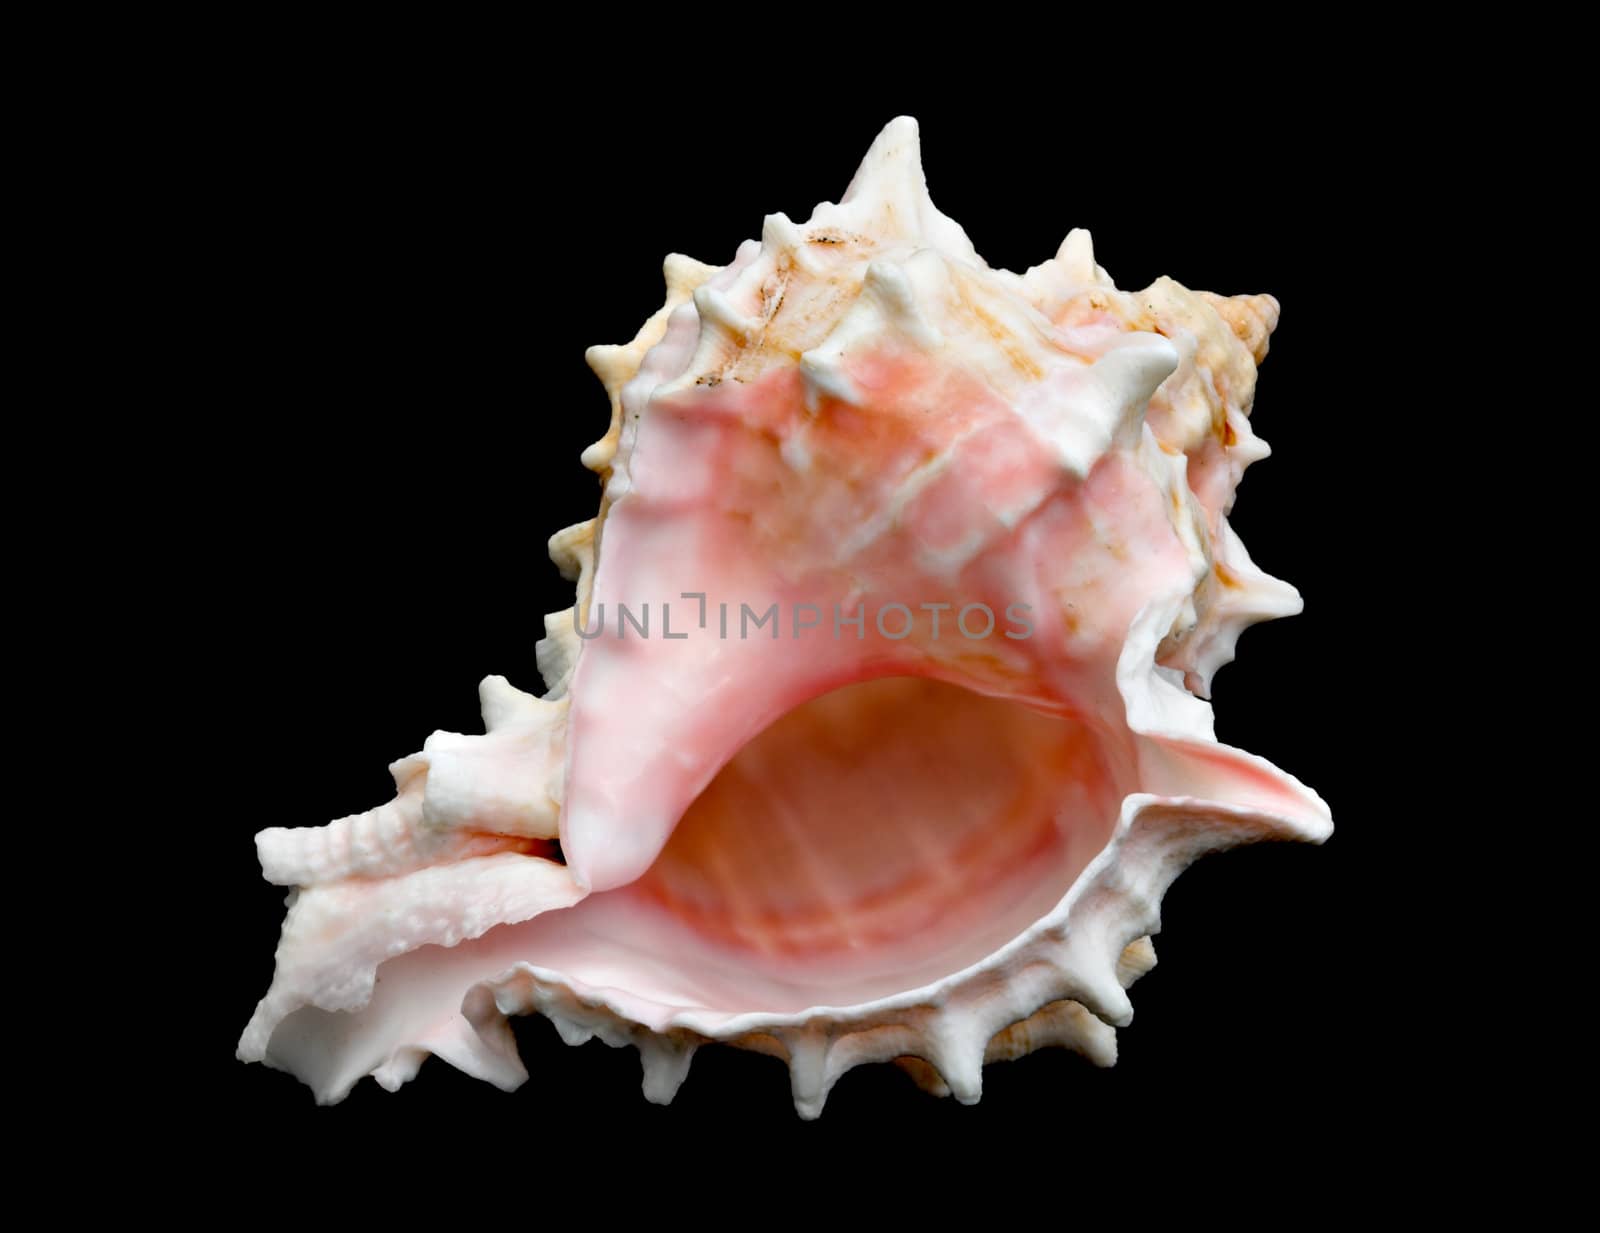 Seashell Over Black #8 (Conch) by sbonk